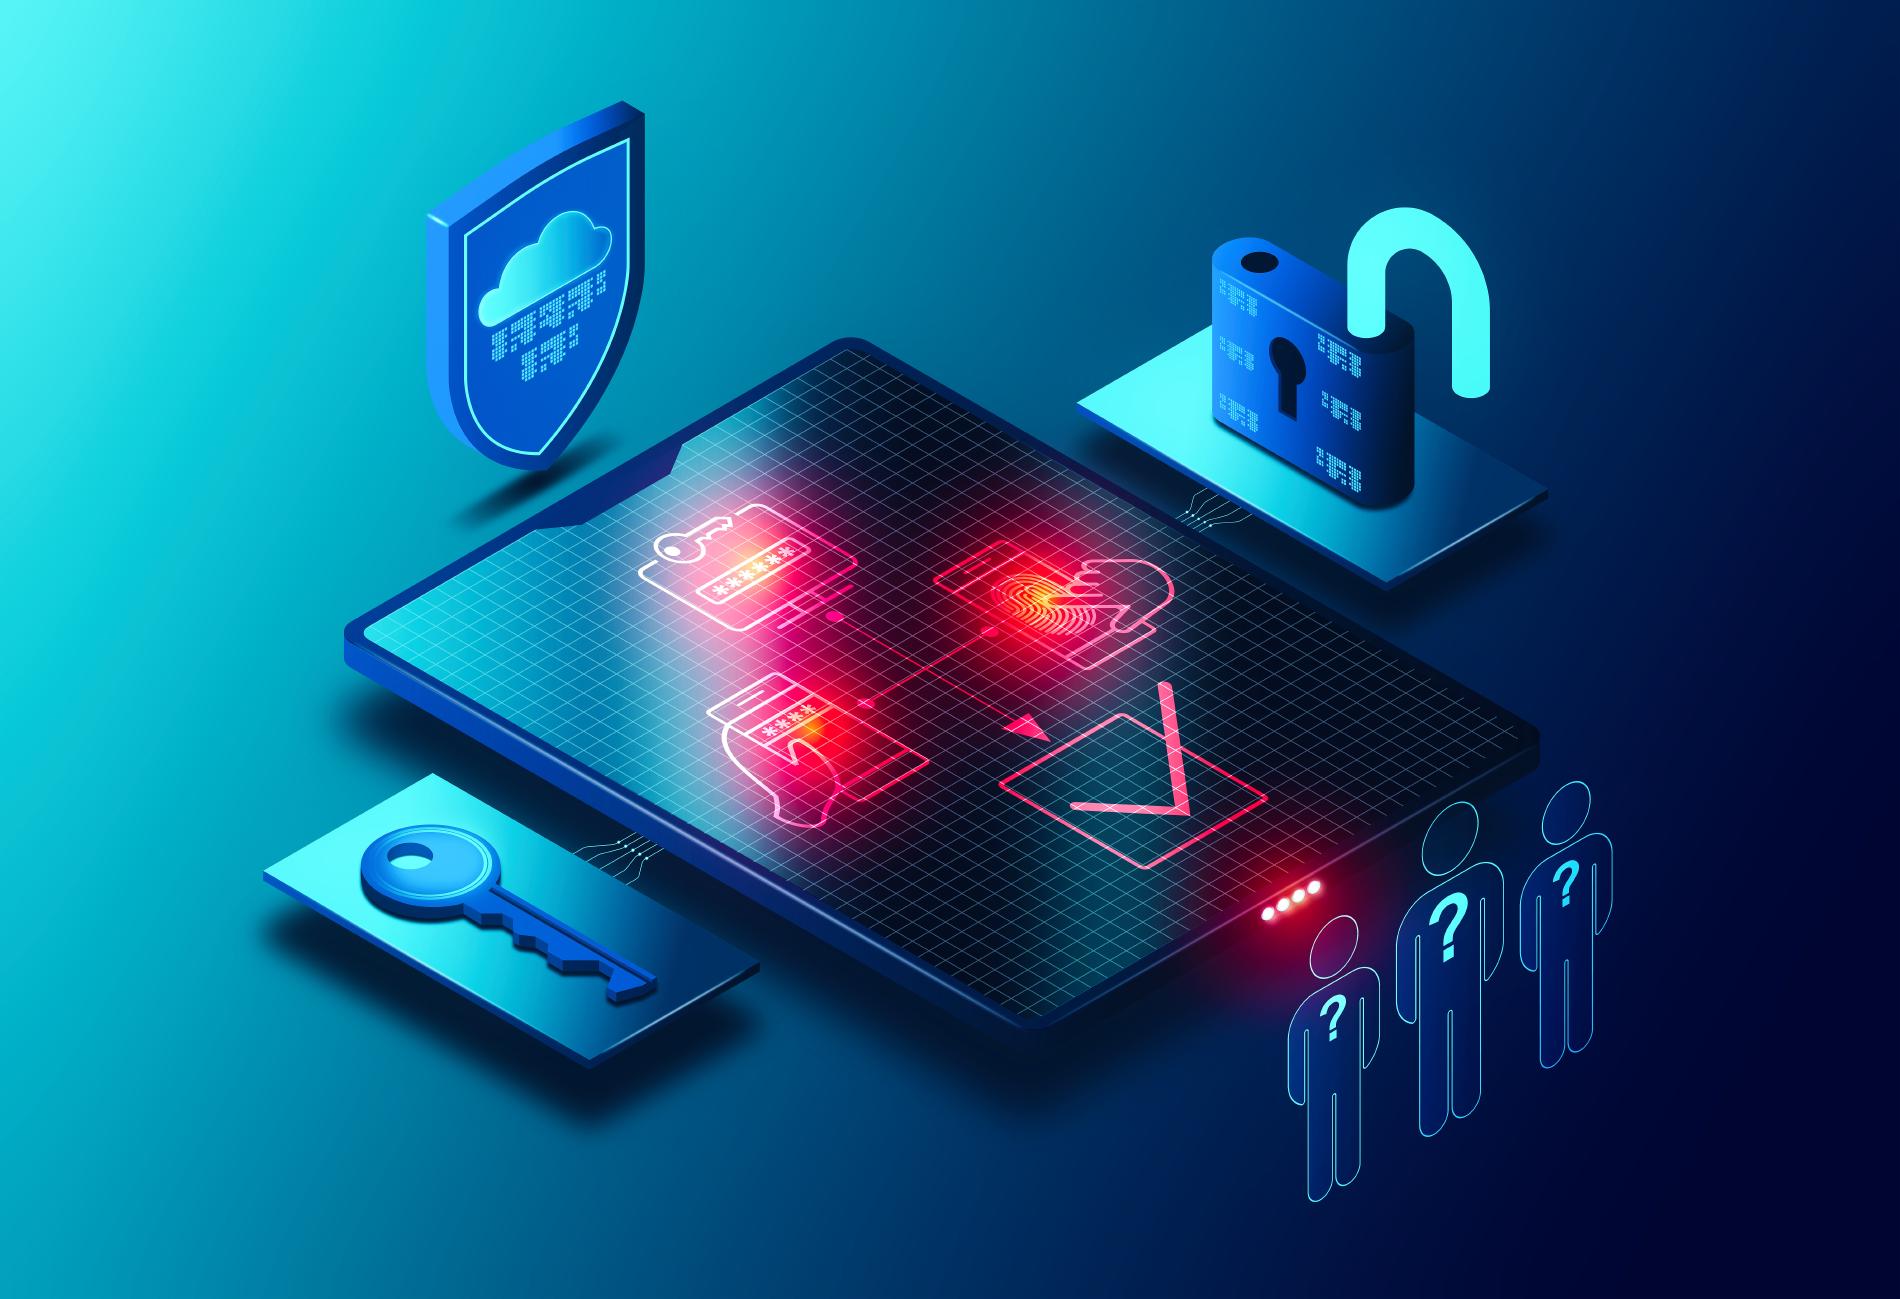 User is clicking on a tablet (biometric login) and gets additional security by a multi-factor authentication concept symbolized by a 3d illustration consisting of key, lock and shield next to the tablet.